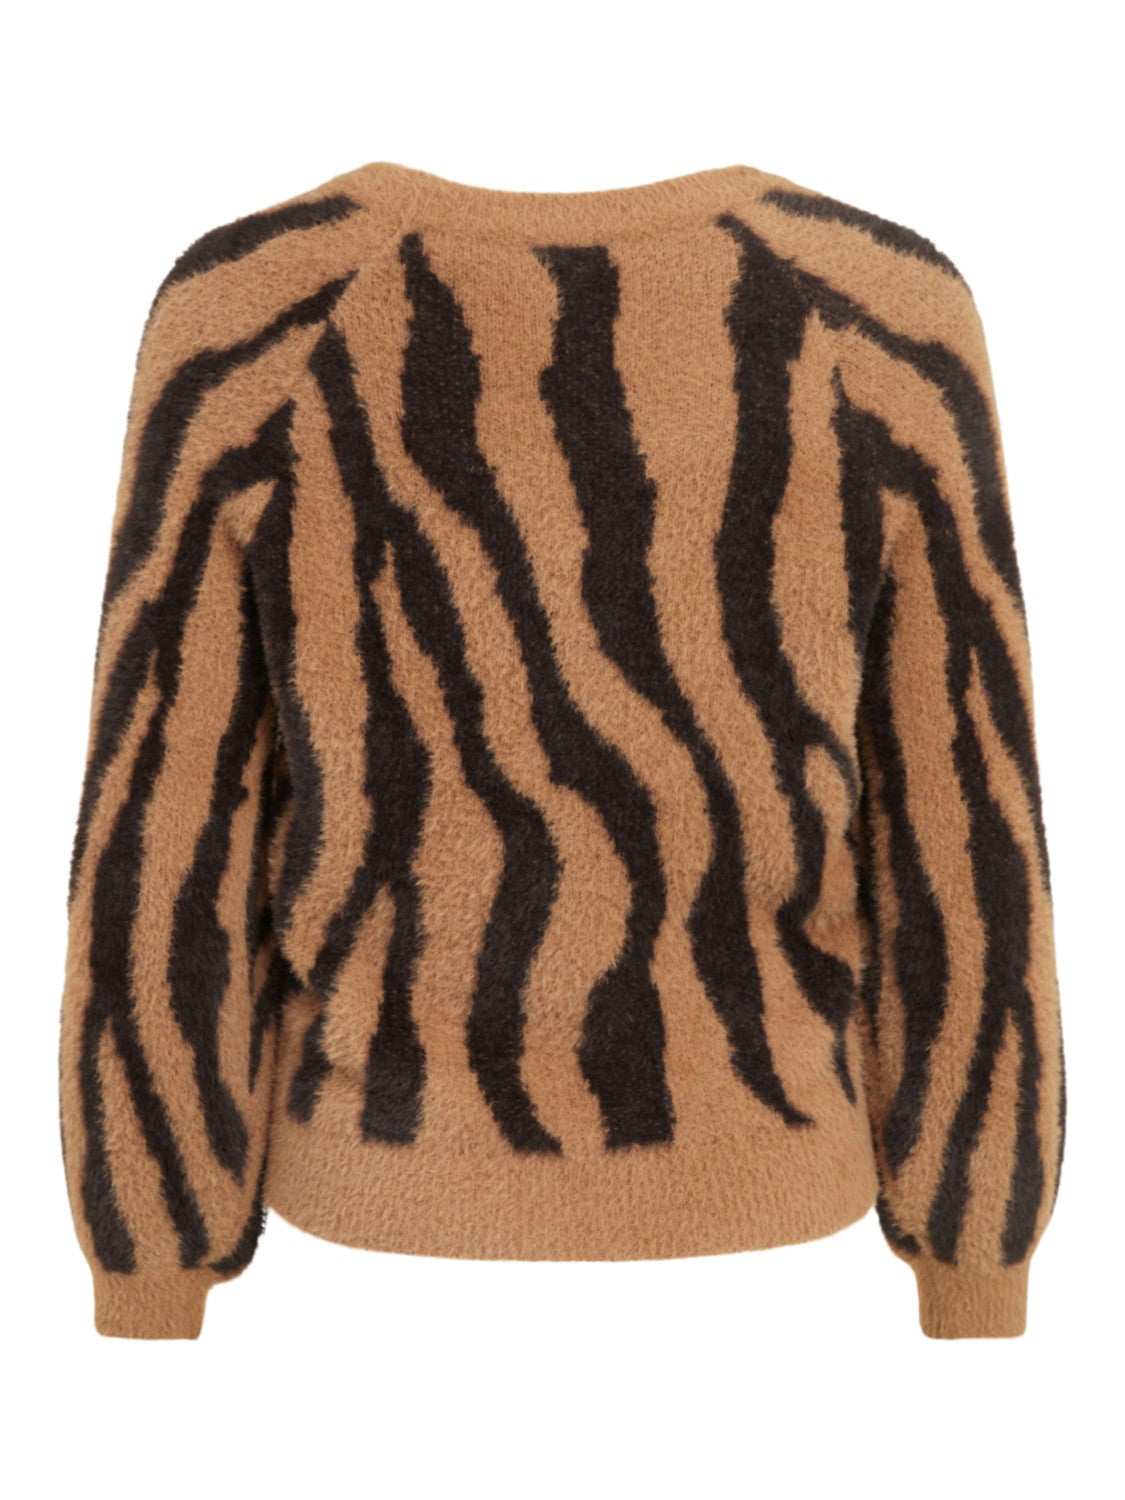 Ello Knit Top (Toasted Coconut)